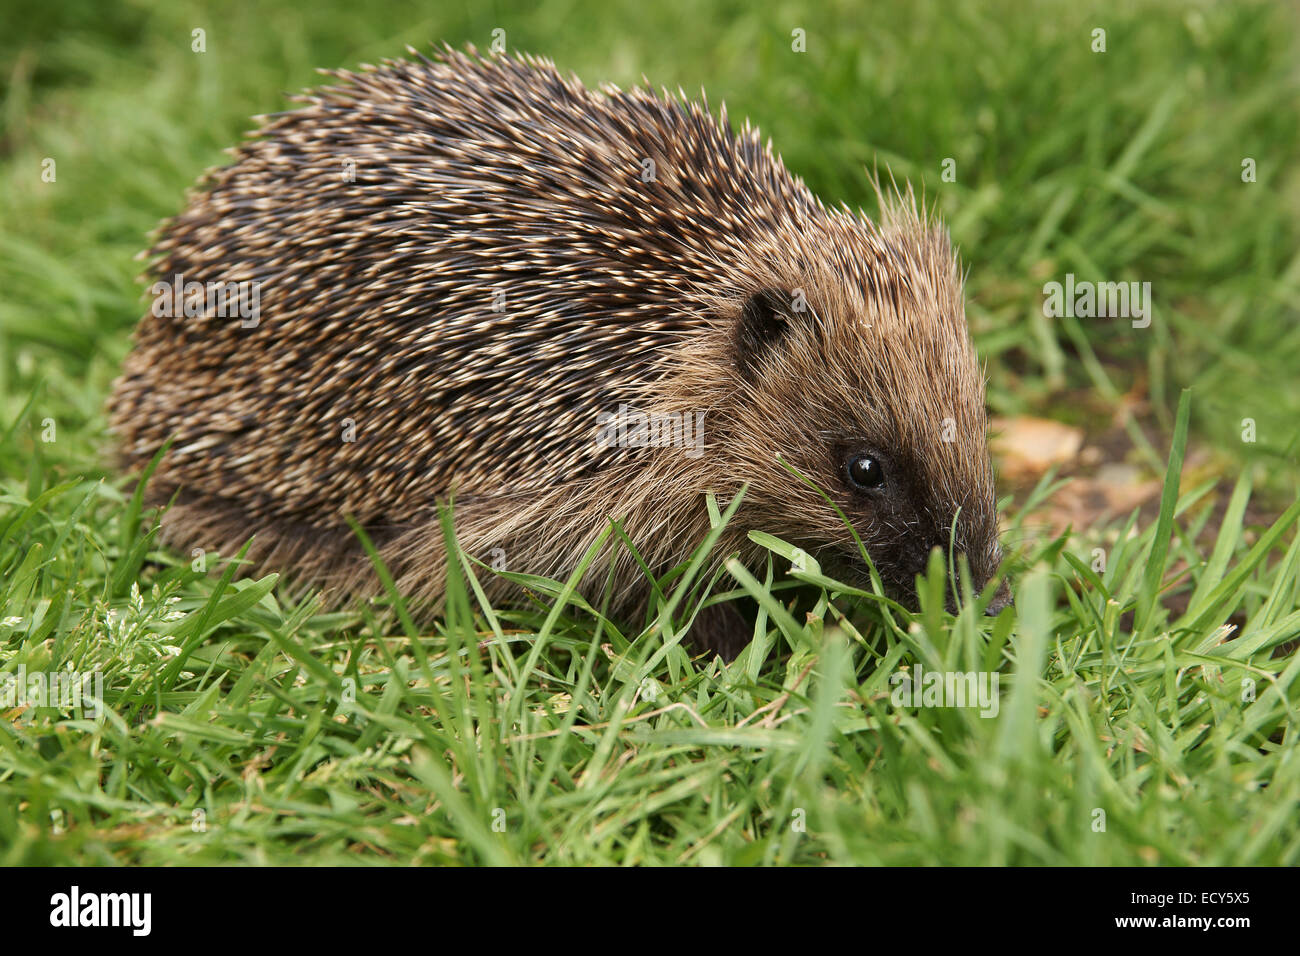 Wild European hedgehog outside in a British garden during daylight hours Stock Photo